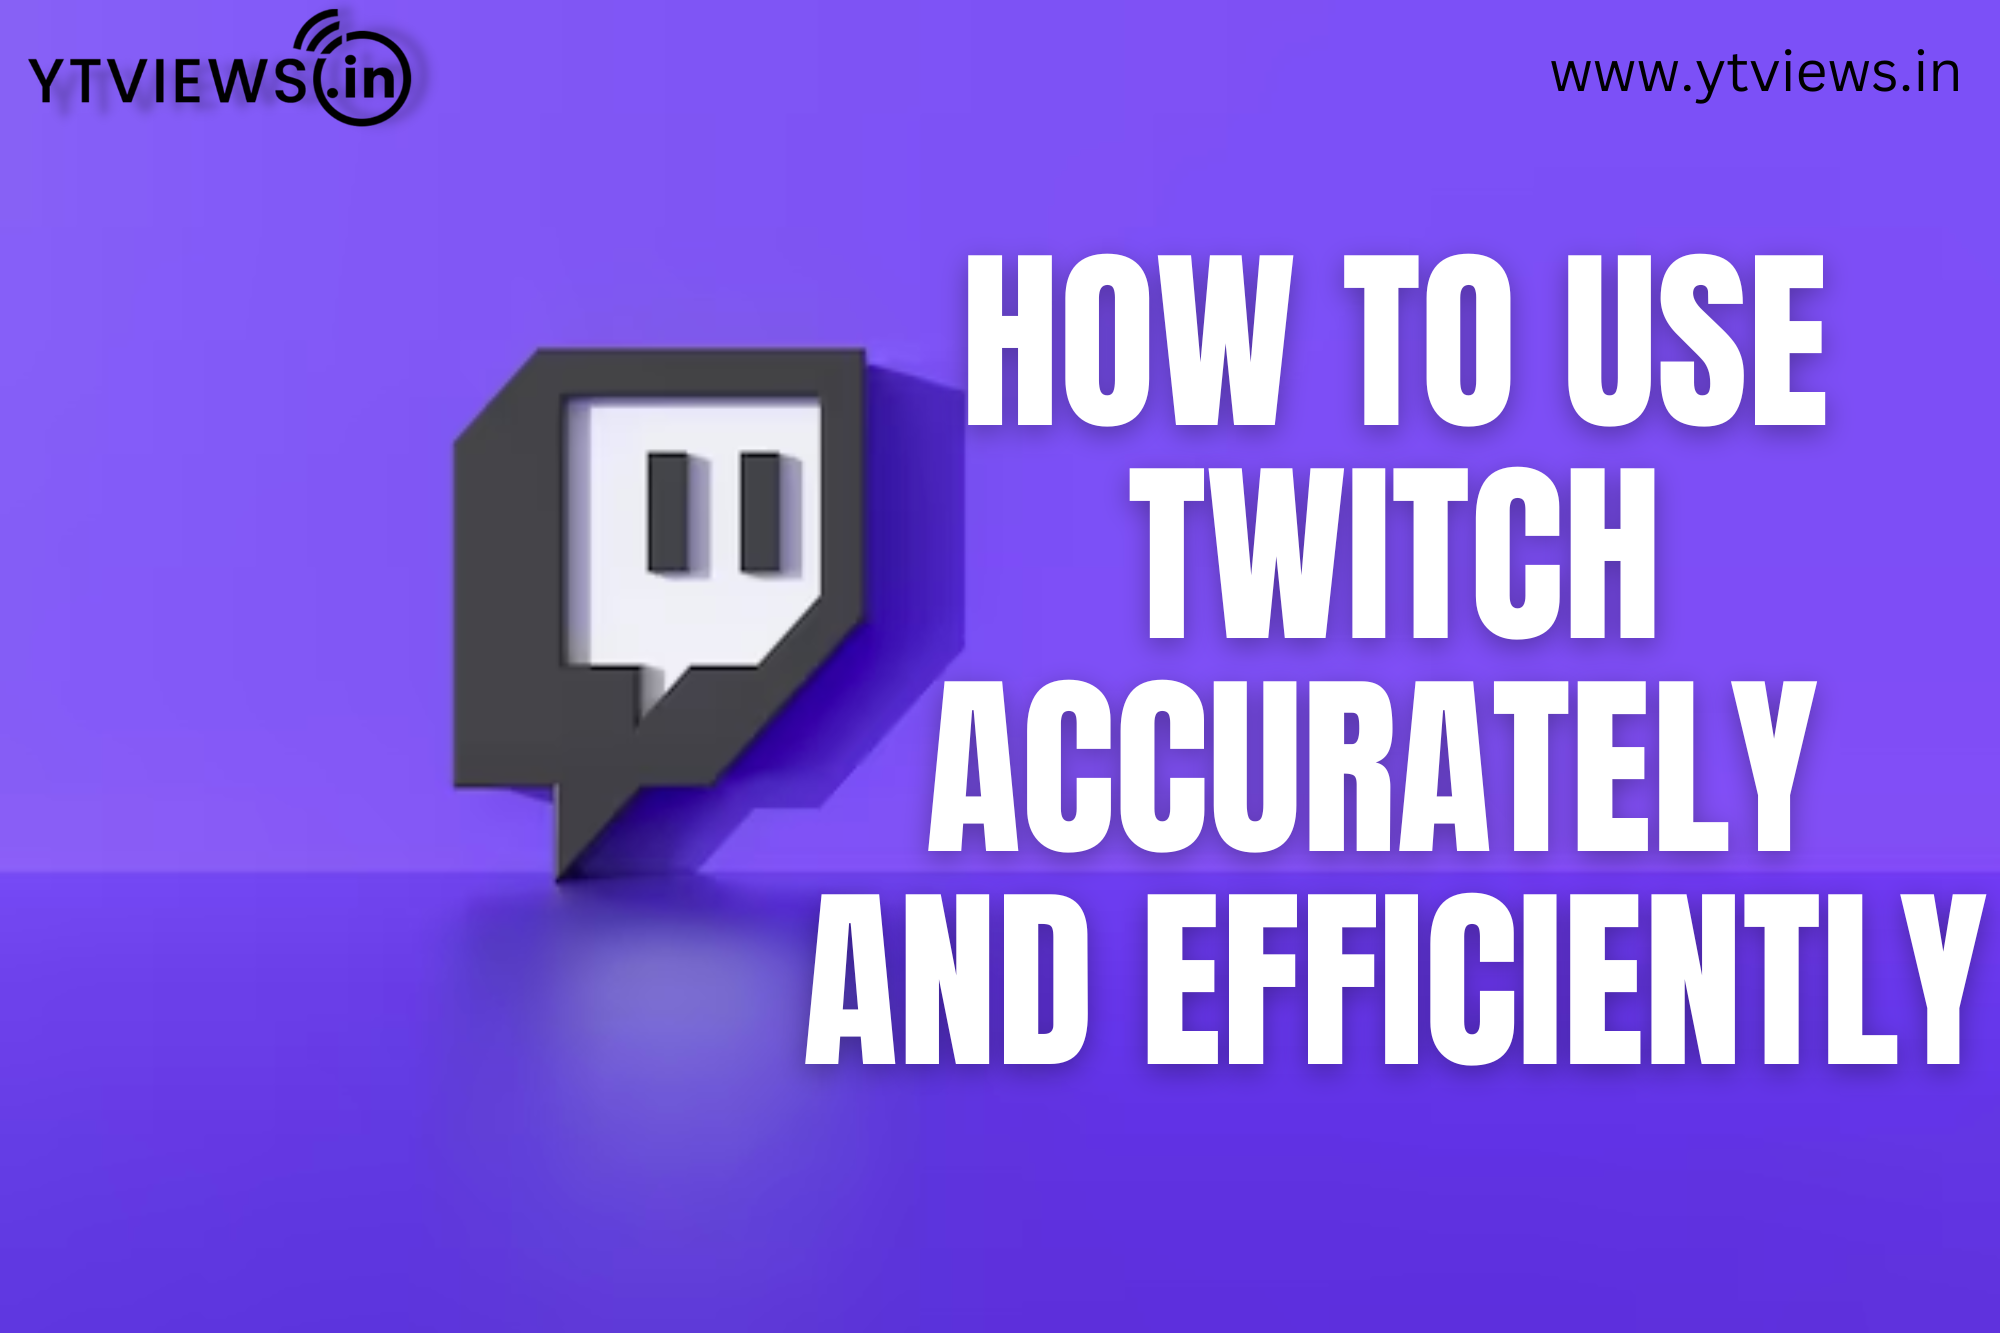 How to use twitch accurately and efficiently